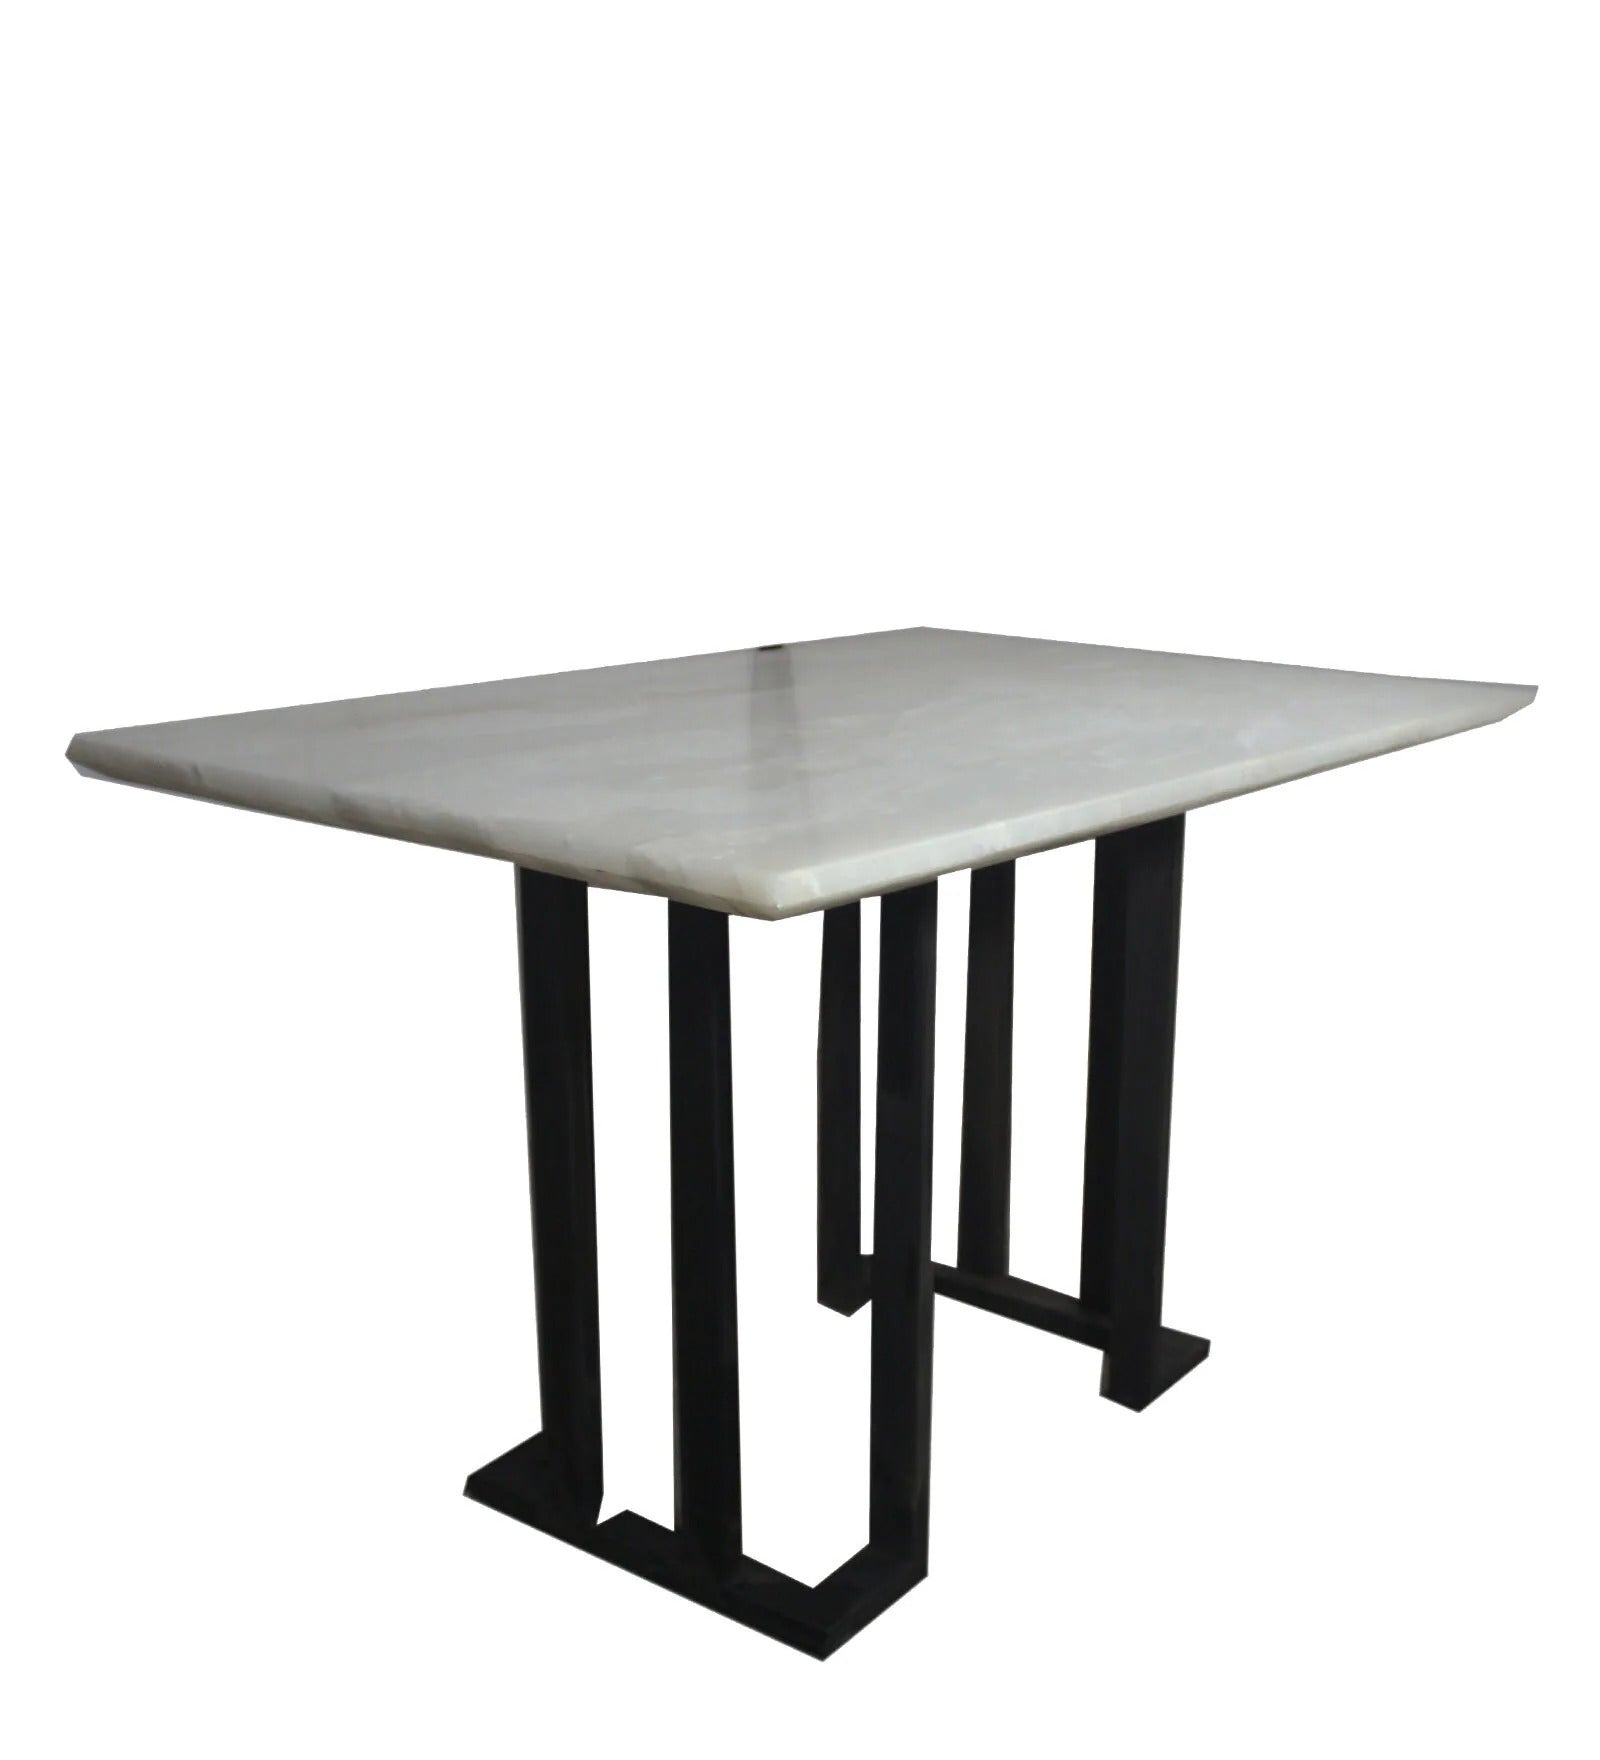 Black and White Dining Table